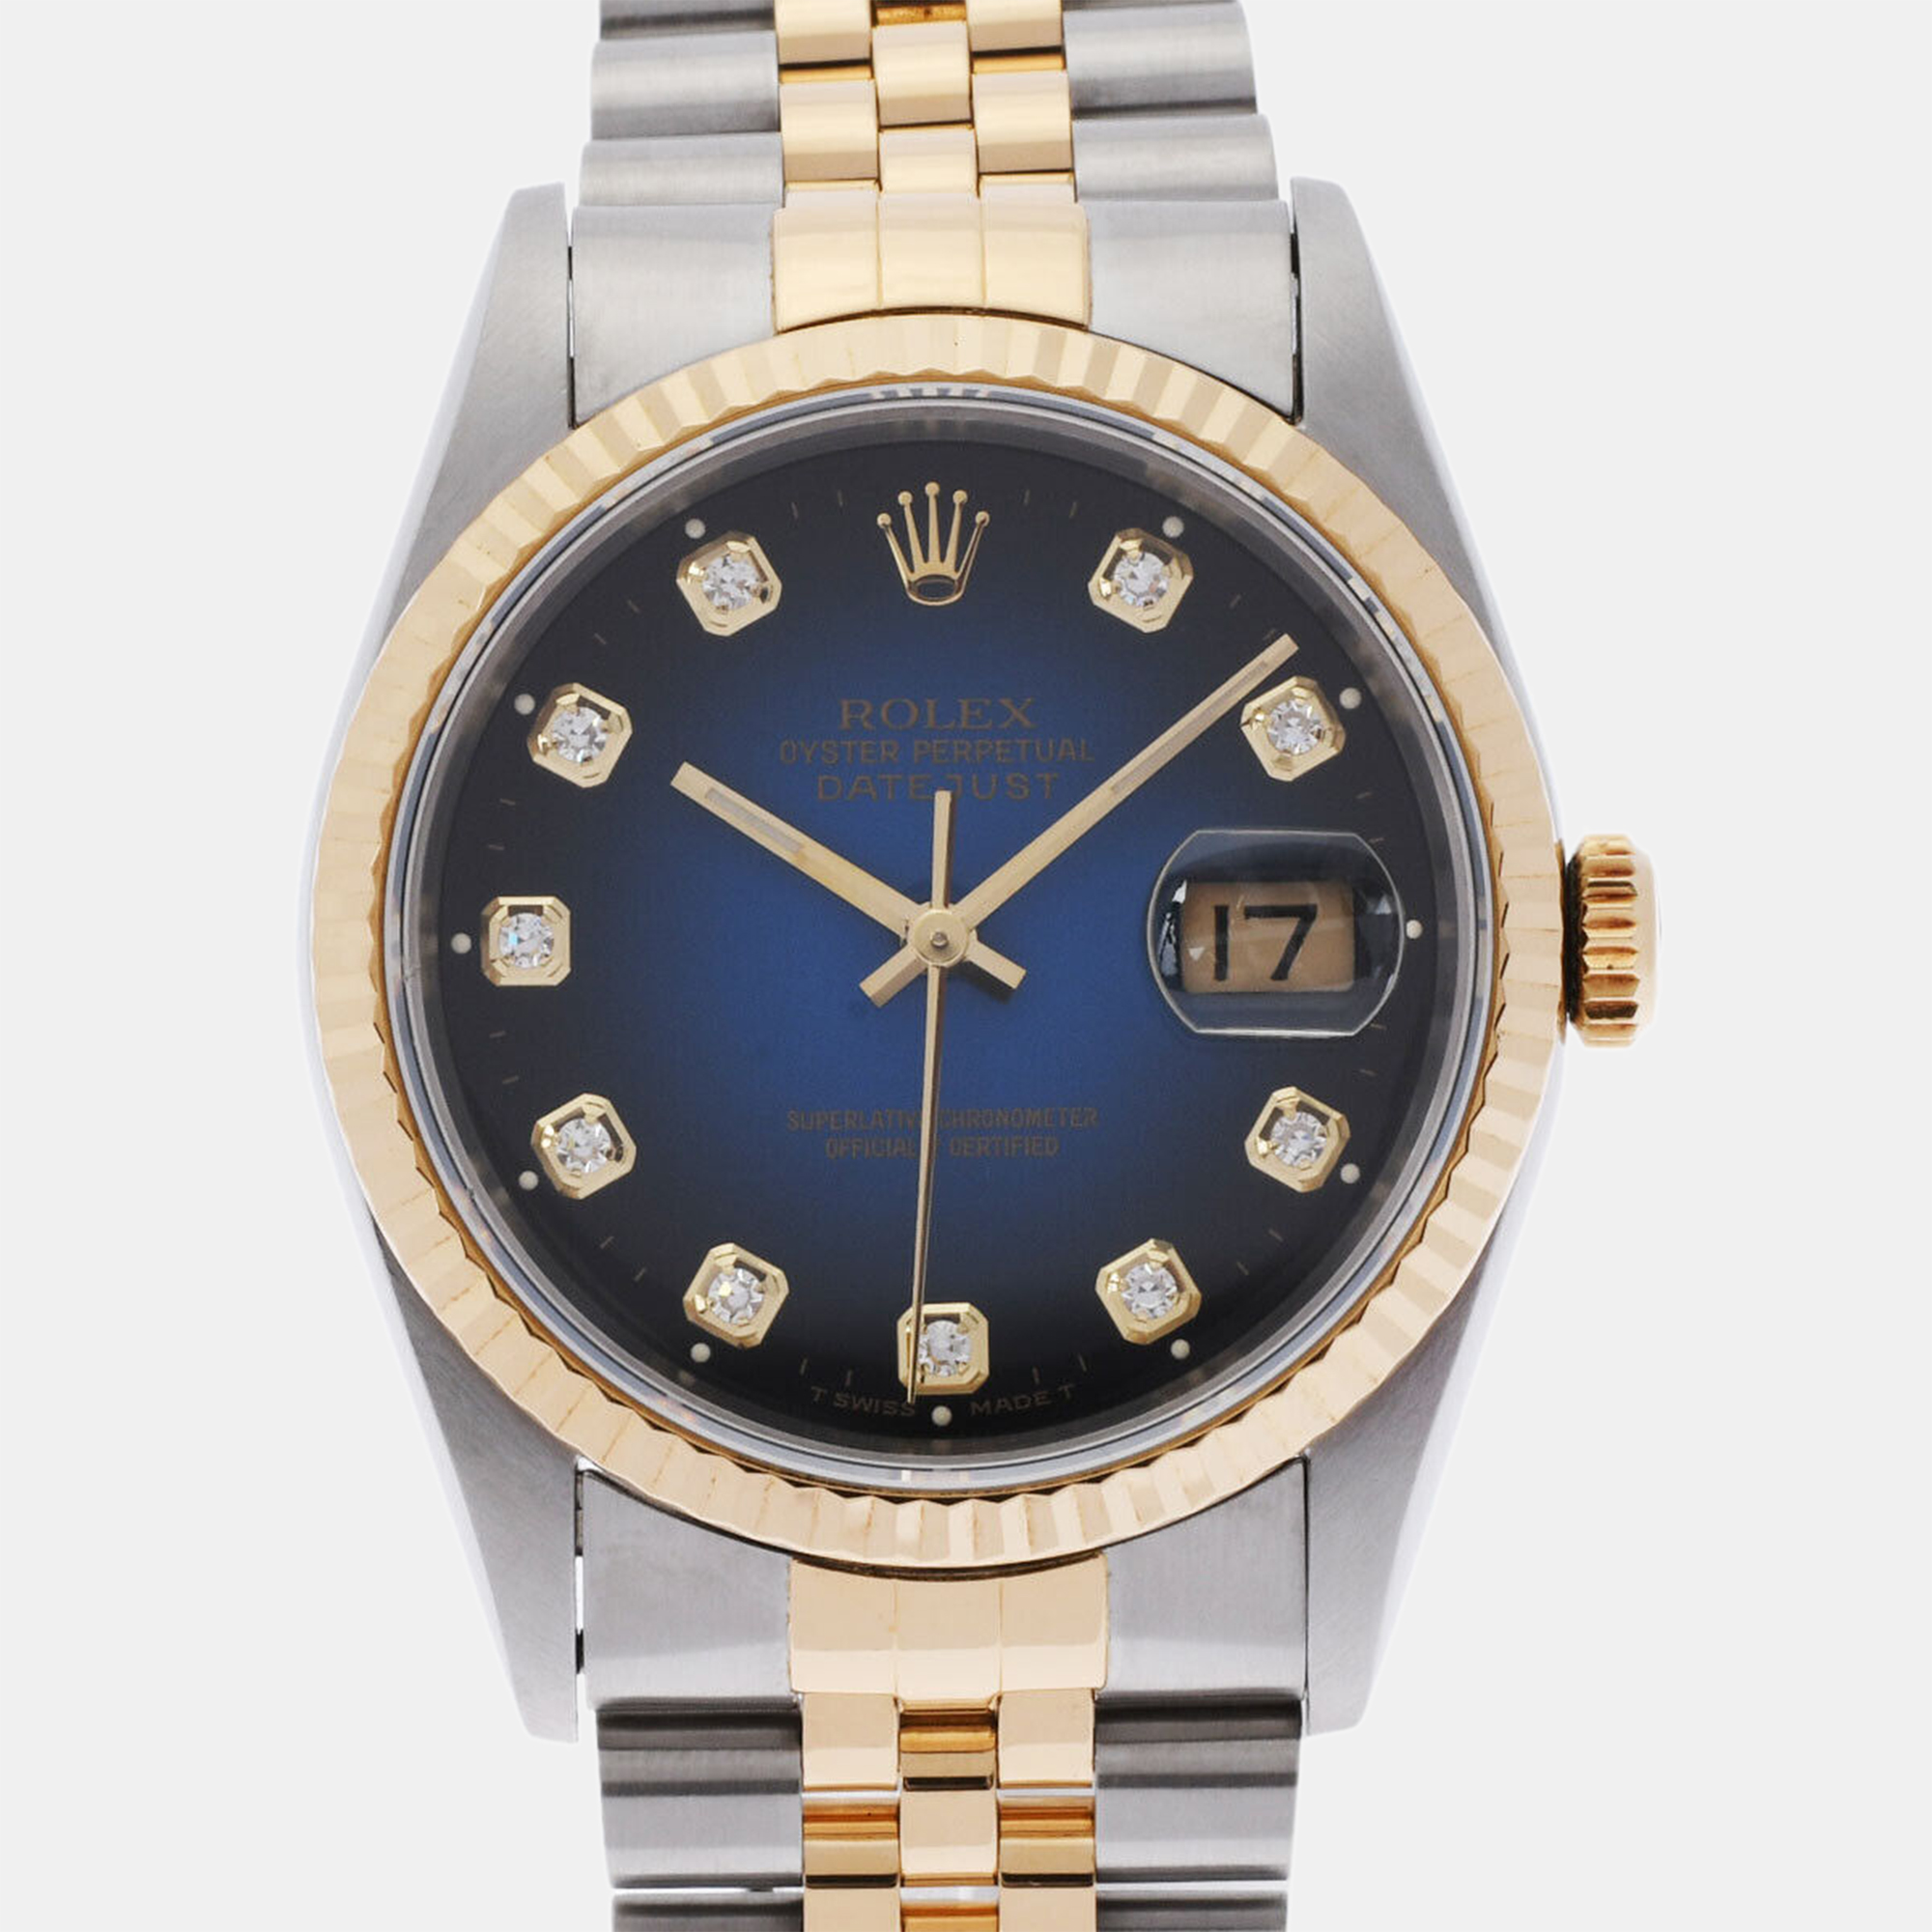 A luxury watch you will love having in your collection is this one from Rolex. Celebrated for its classy style details innovation and luxe factor Rolex delivers some of the most coveted watches in the world. Youll enjoy wearing this one.